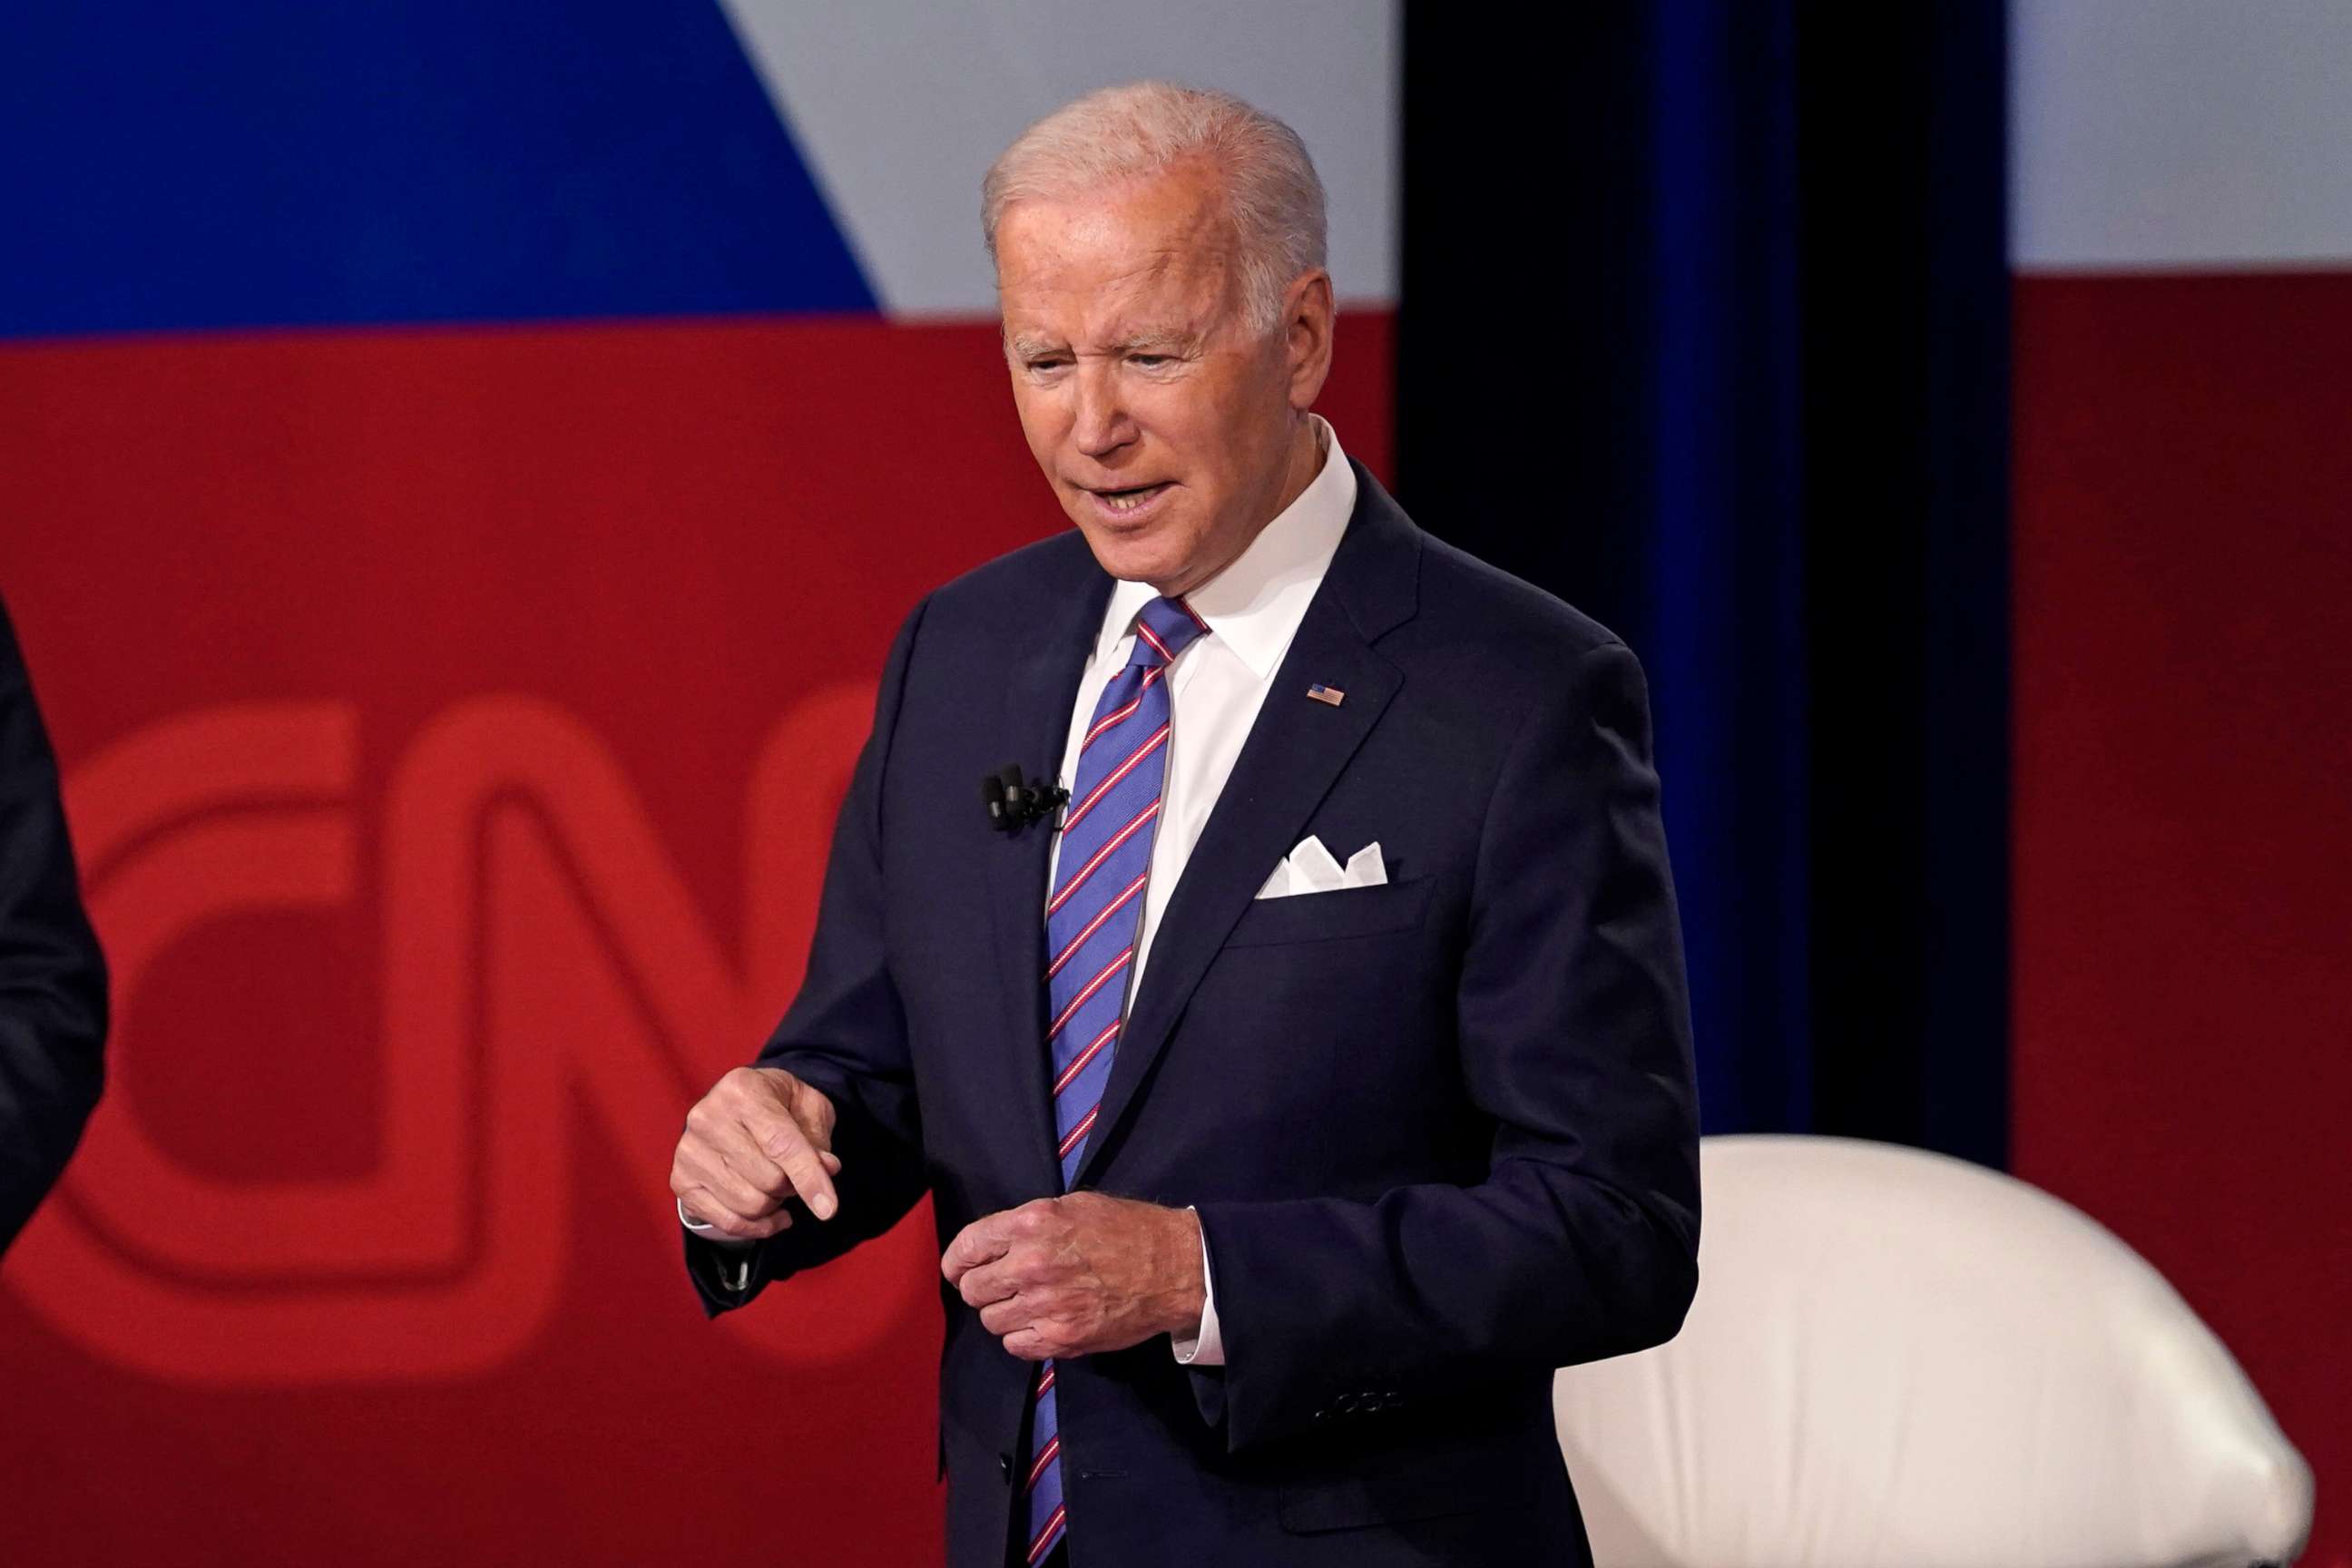 PHOTO: President Joe Biden participates in a CNN town hall at the Baltimore Center Stage Pearlstone Theater, Oct. 21, 2021, in Baltimore.